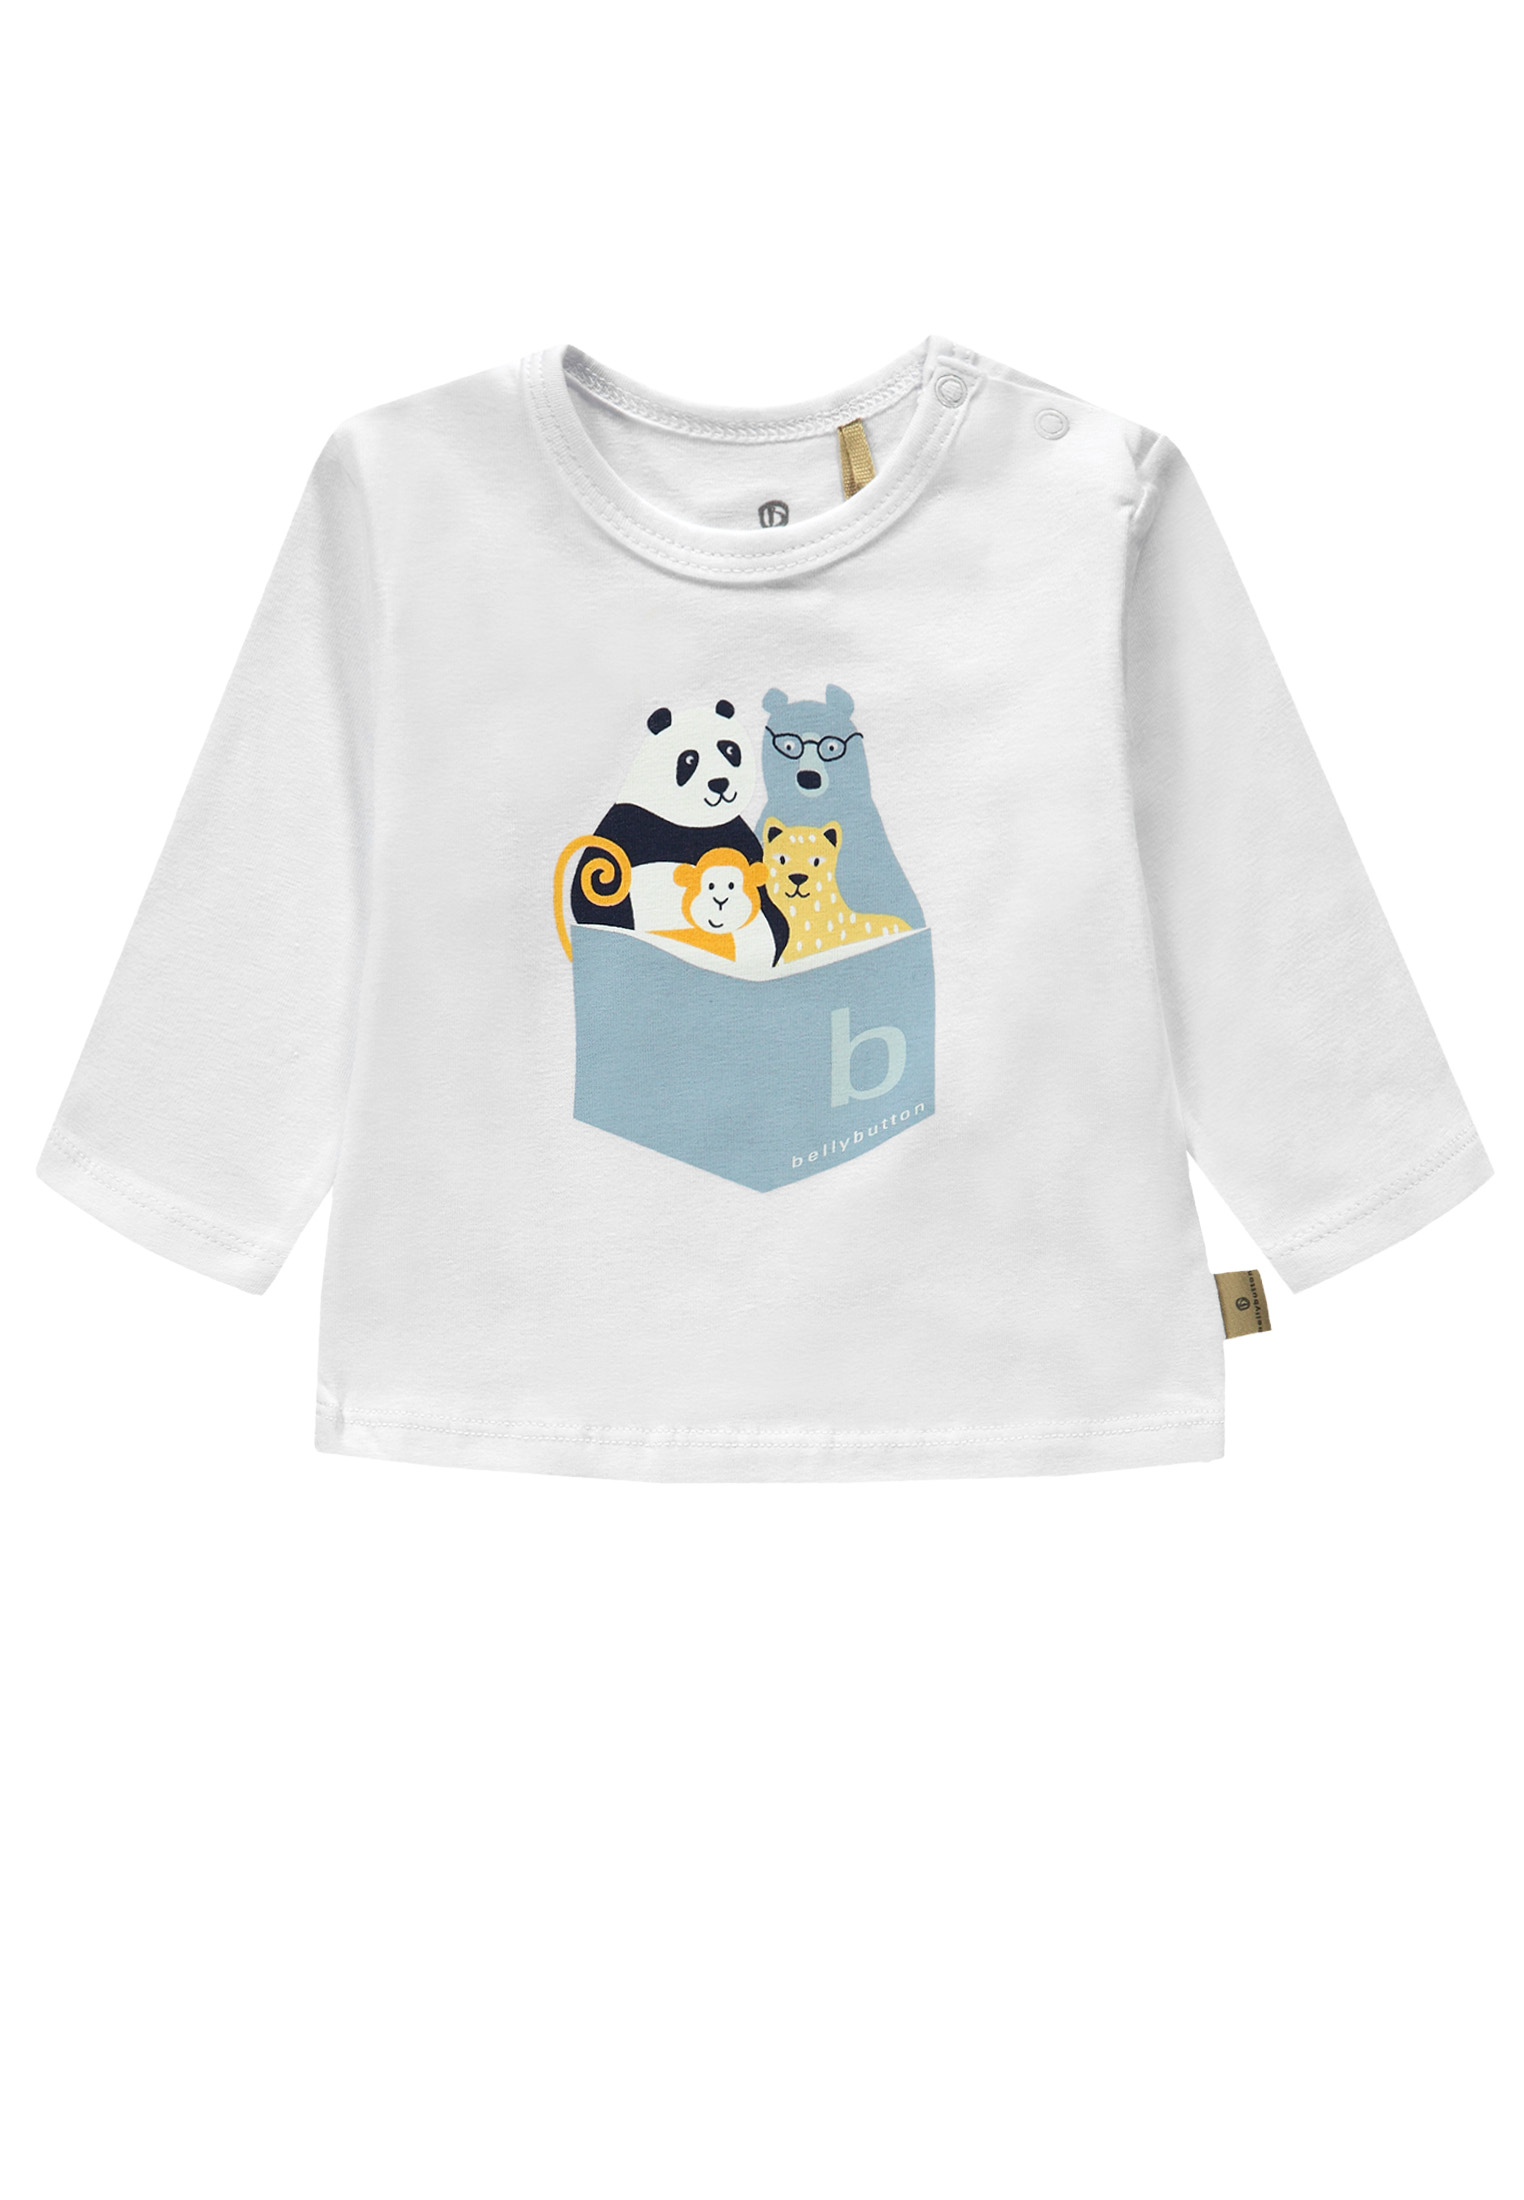 Shirt blau/gelb/weiß 80 Belly Button mother nature and me Tiere